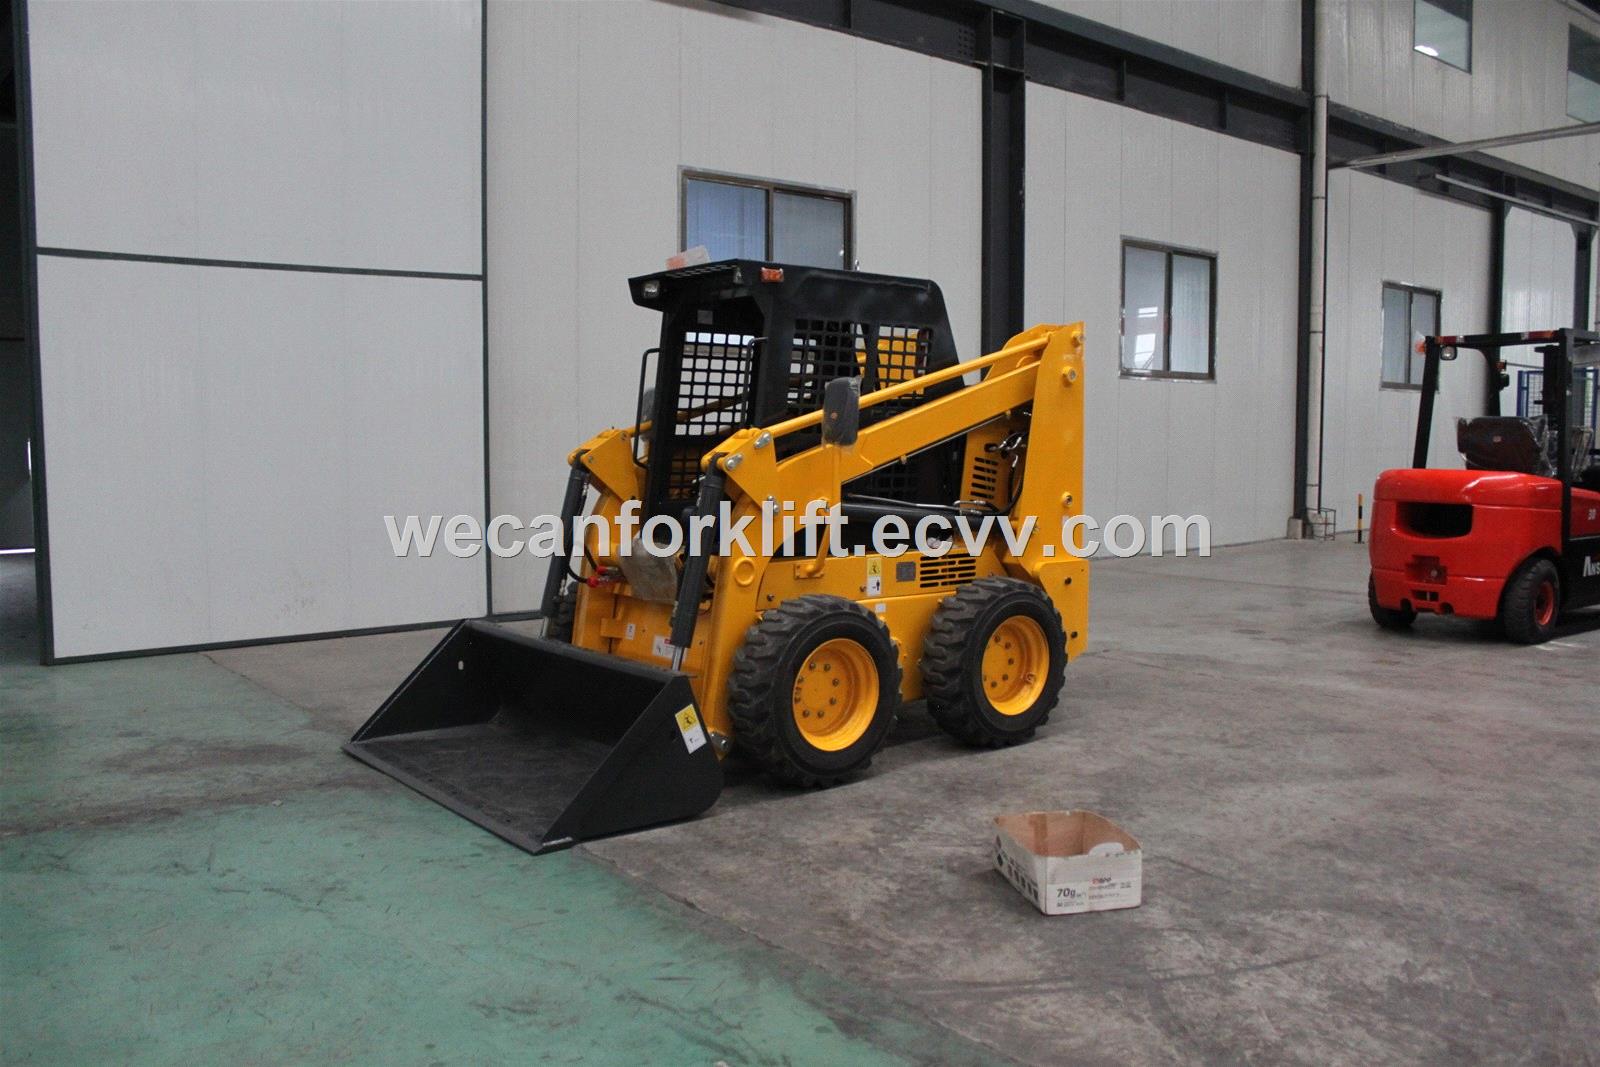 overseas Aftersales Service Provided Skid Steer Loader Type